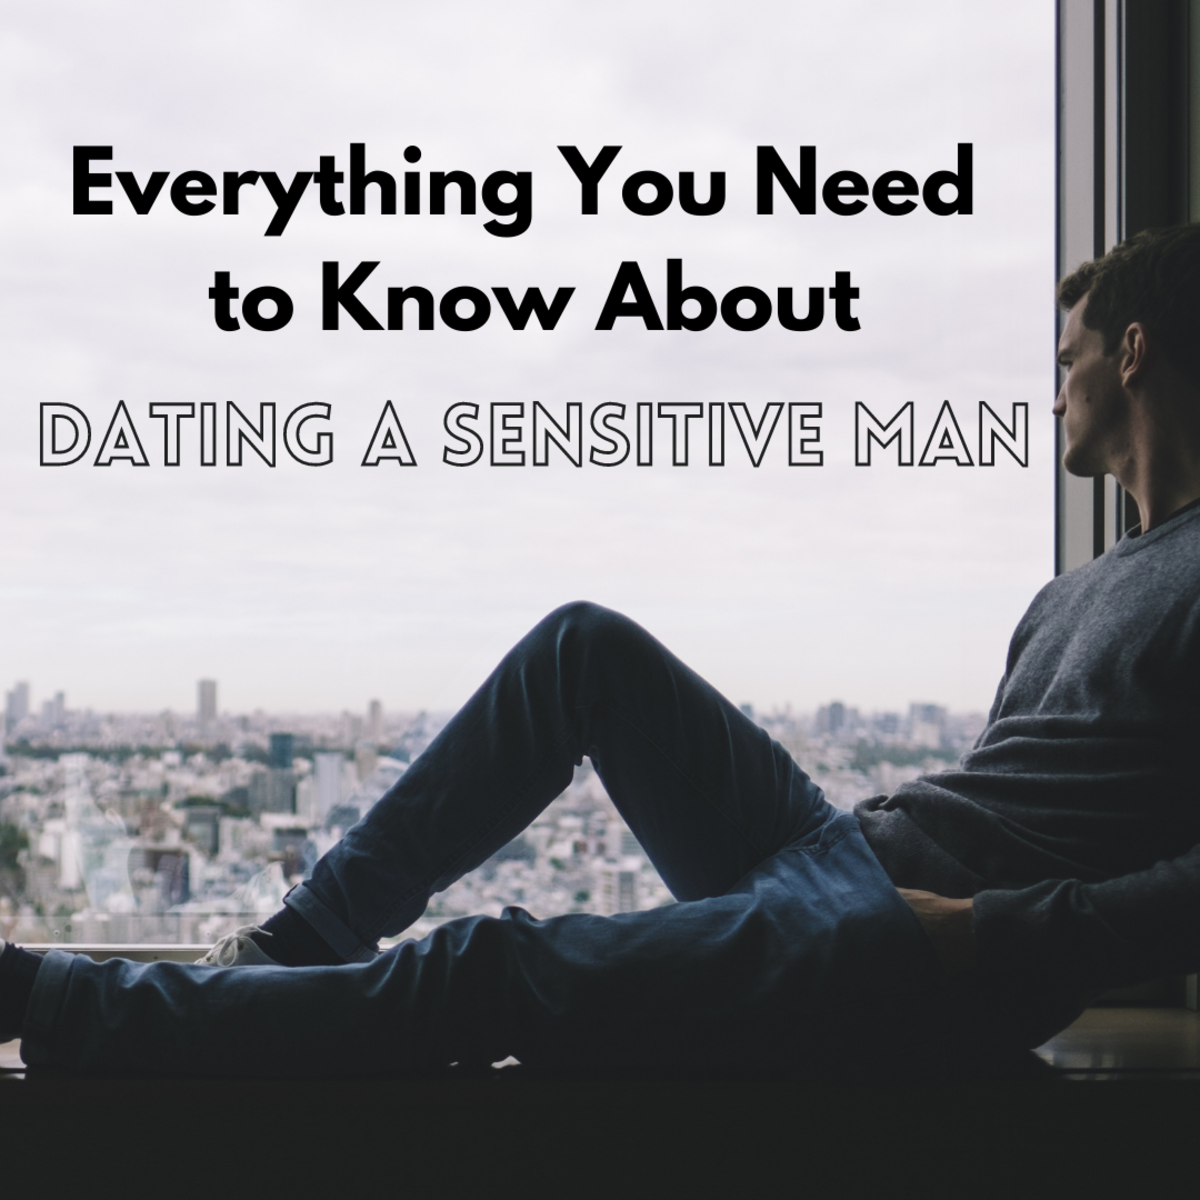 Interested in a sensitive or submissive man? Read on for tips and tricks for making the most out of your relationship.